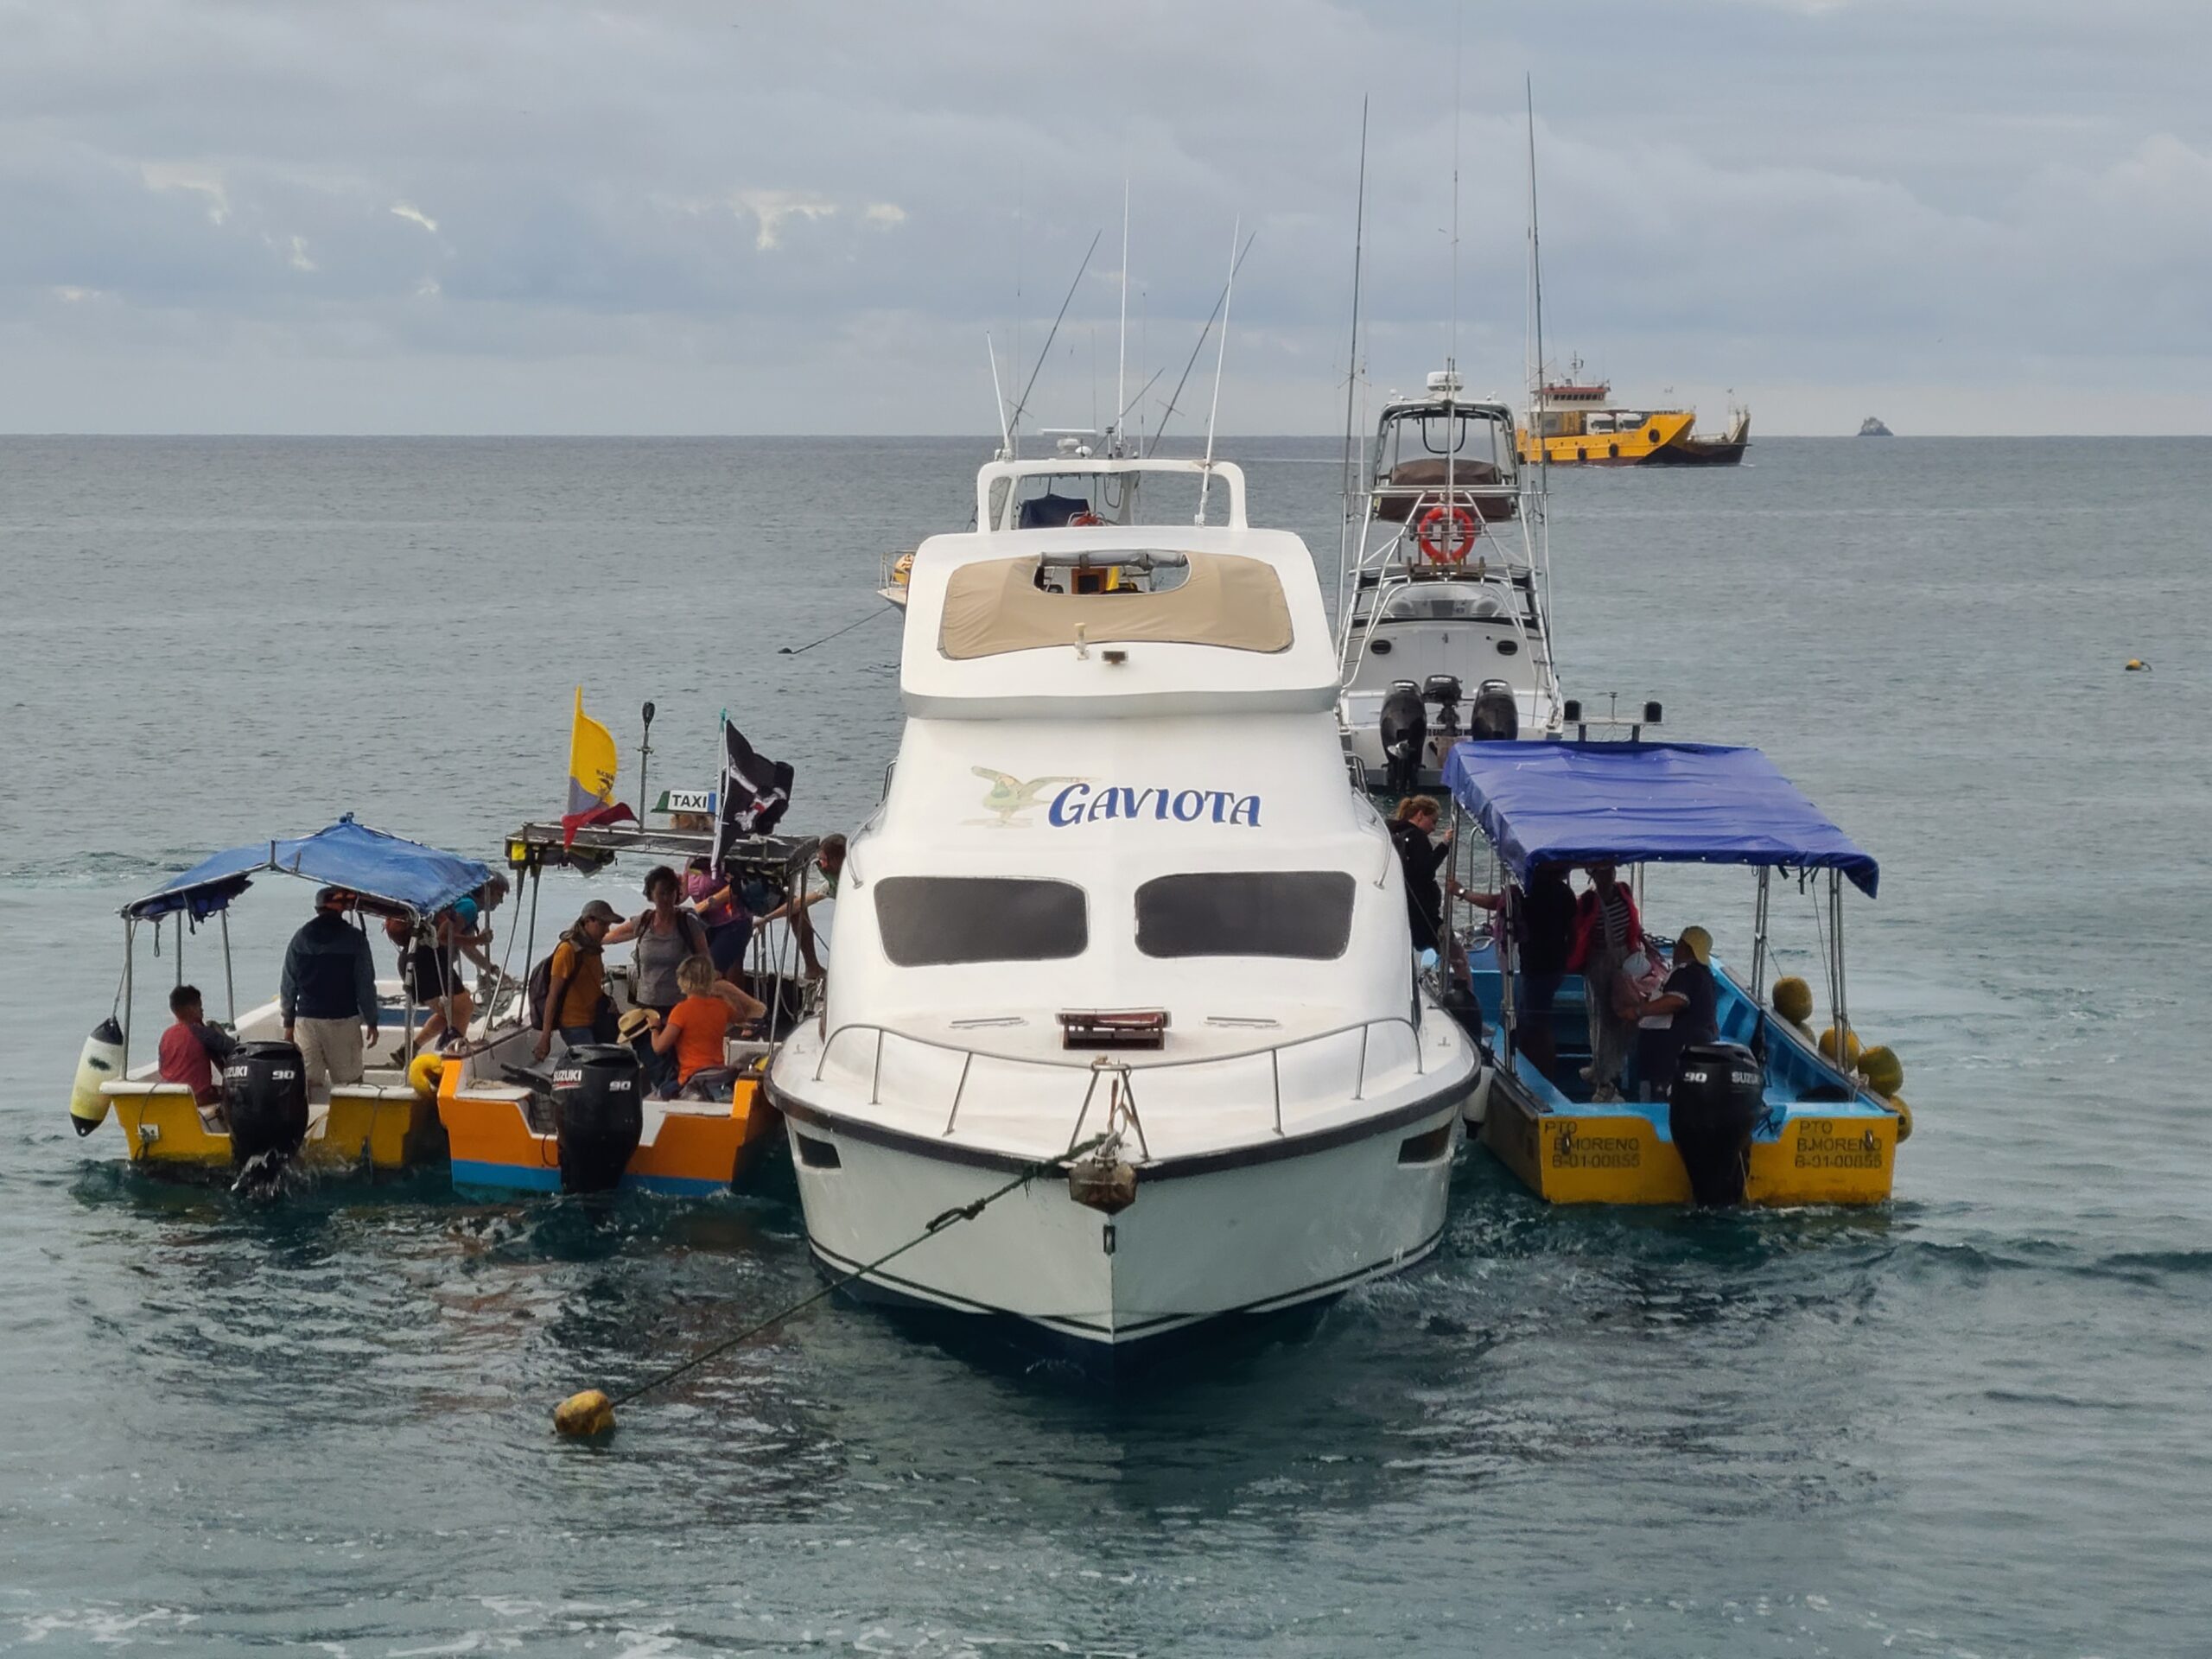 transferring to water taxis from an inter-island ferry, San Cristobal, Galapagos